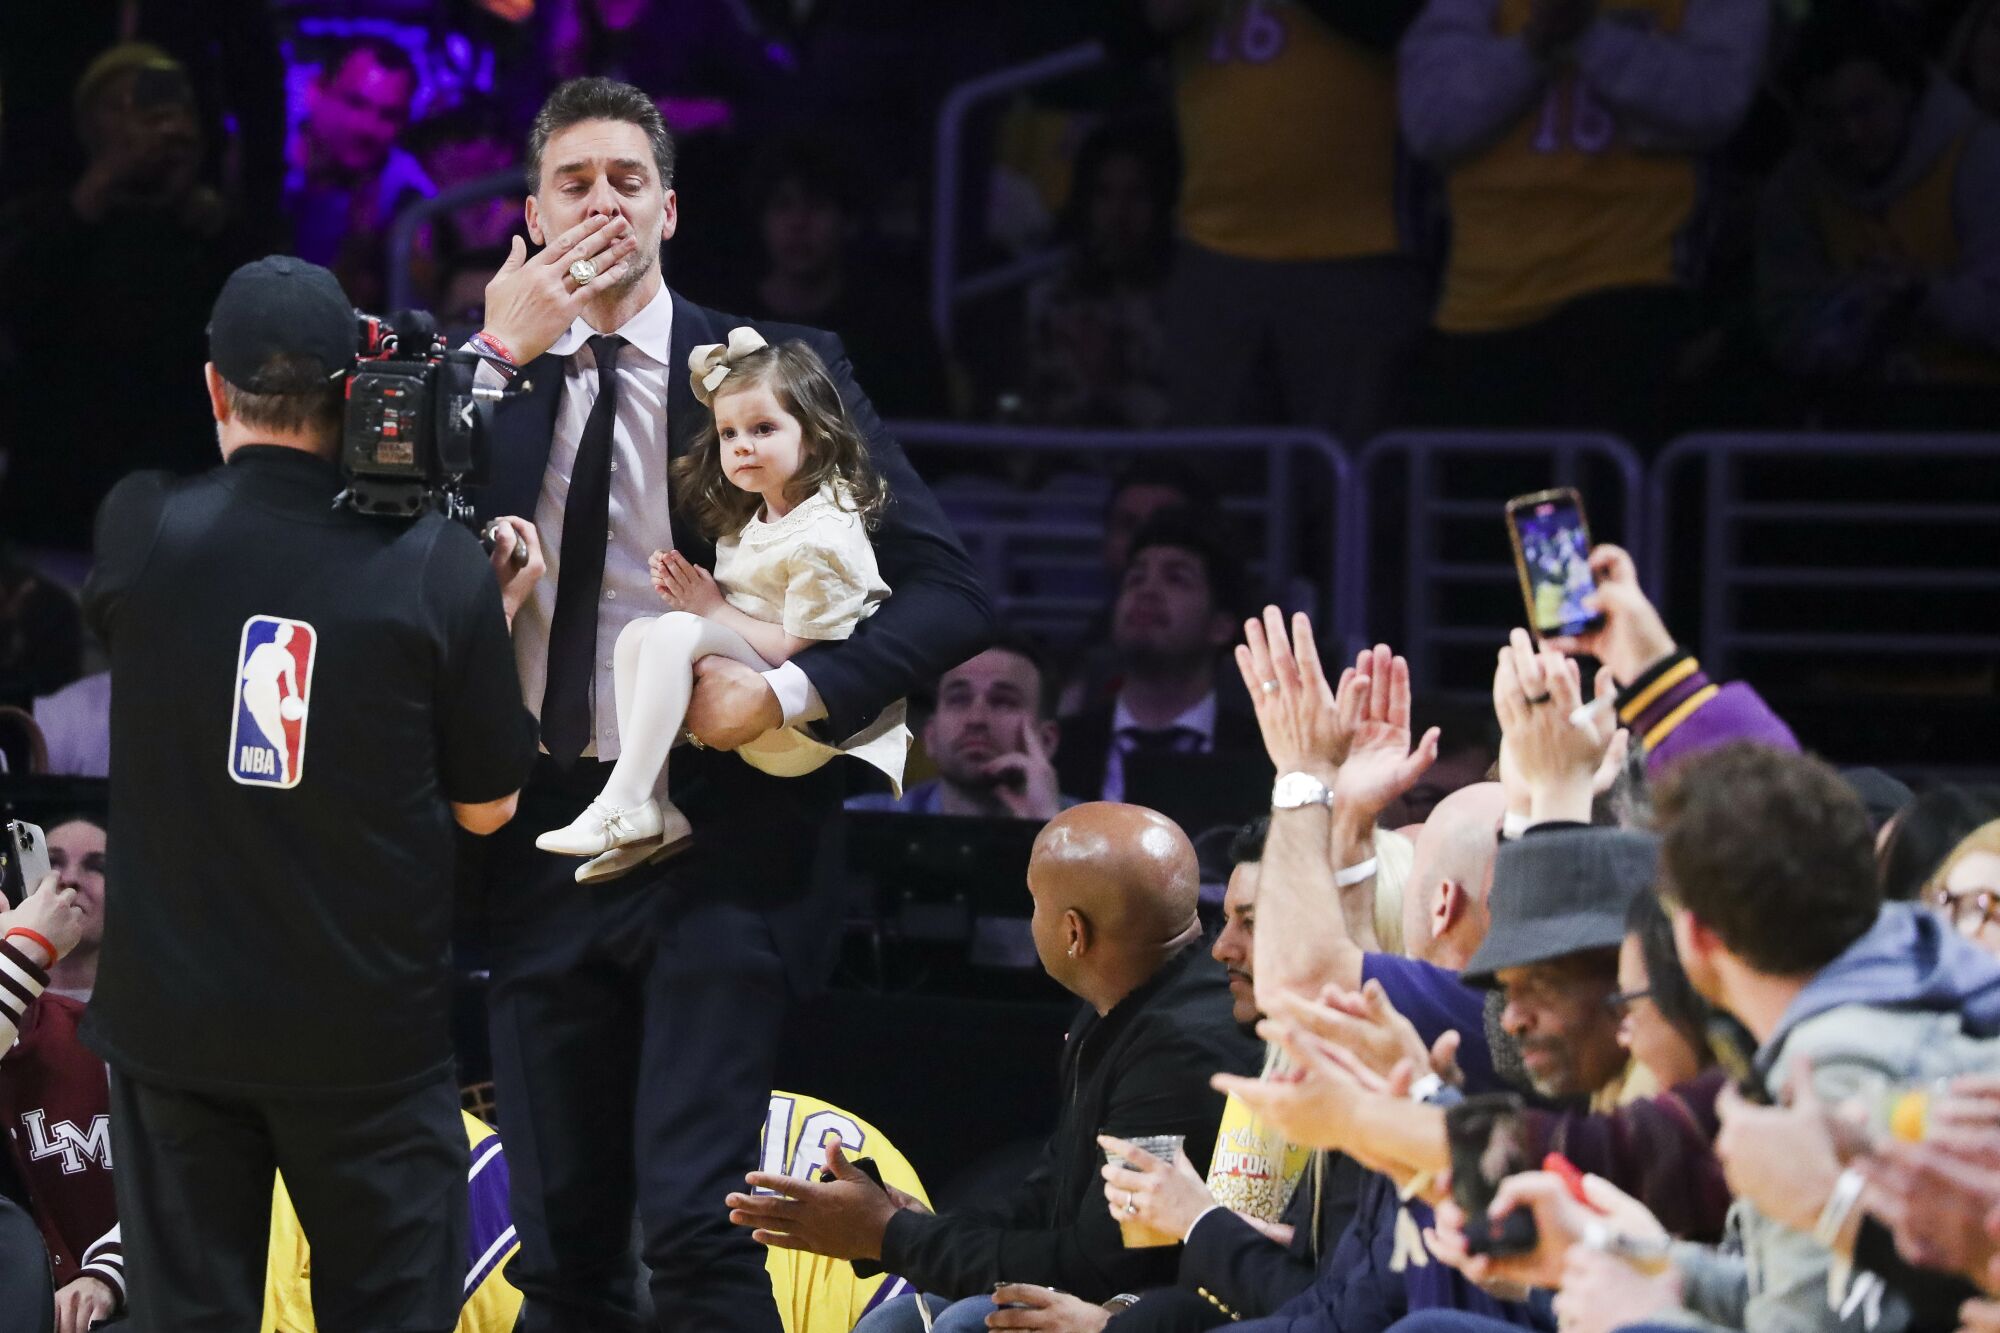 Former Lakers star Pau Gasol blows a kiss to the fans while holding his daughter Elisabet Gianna.